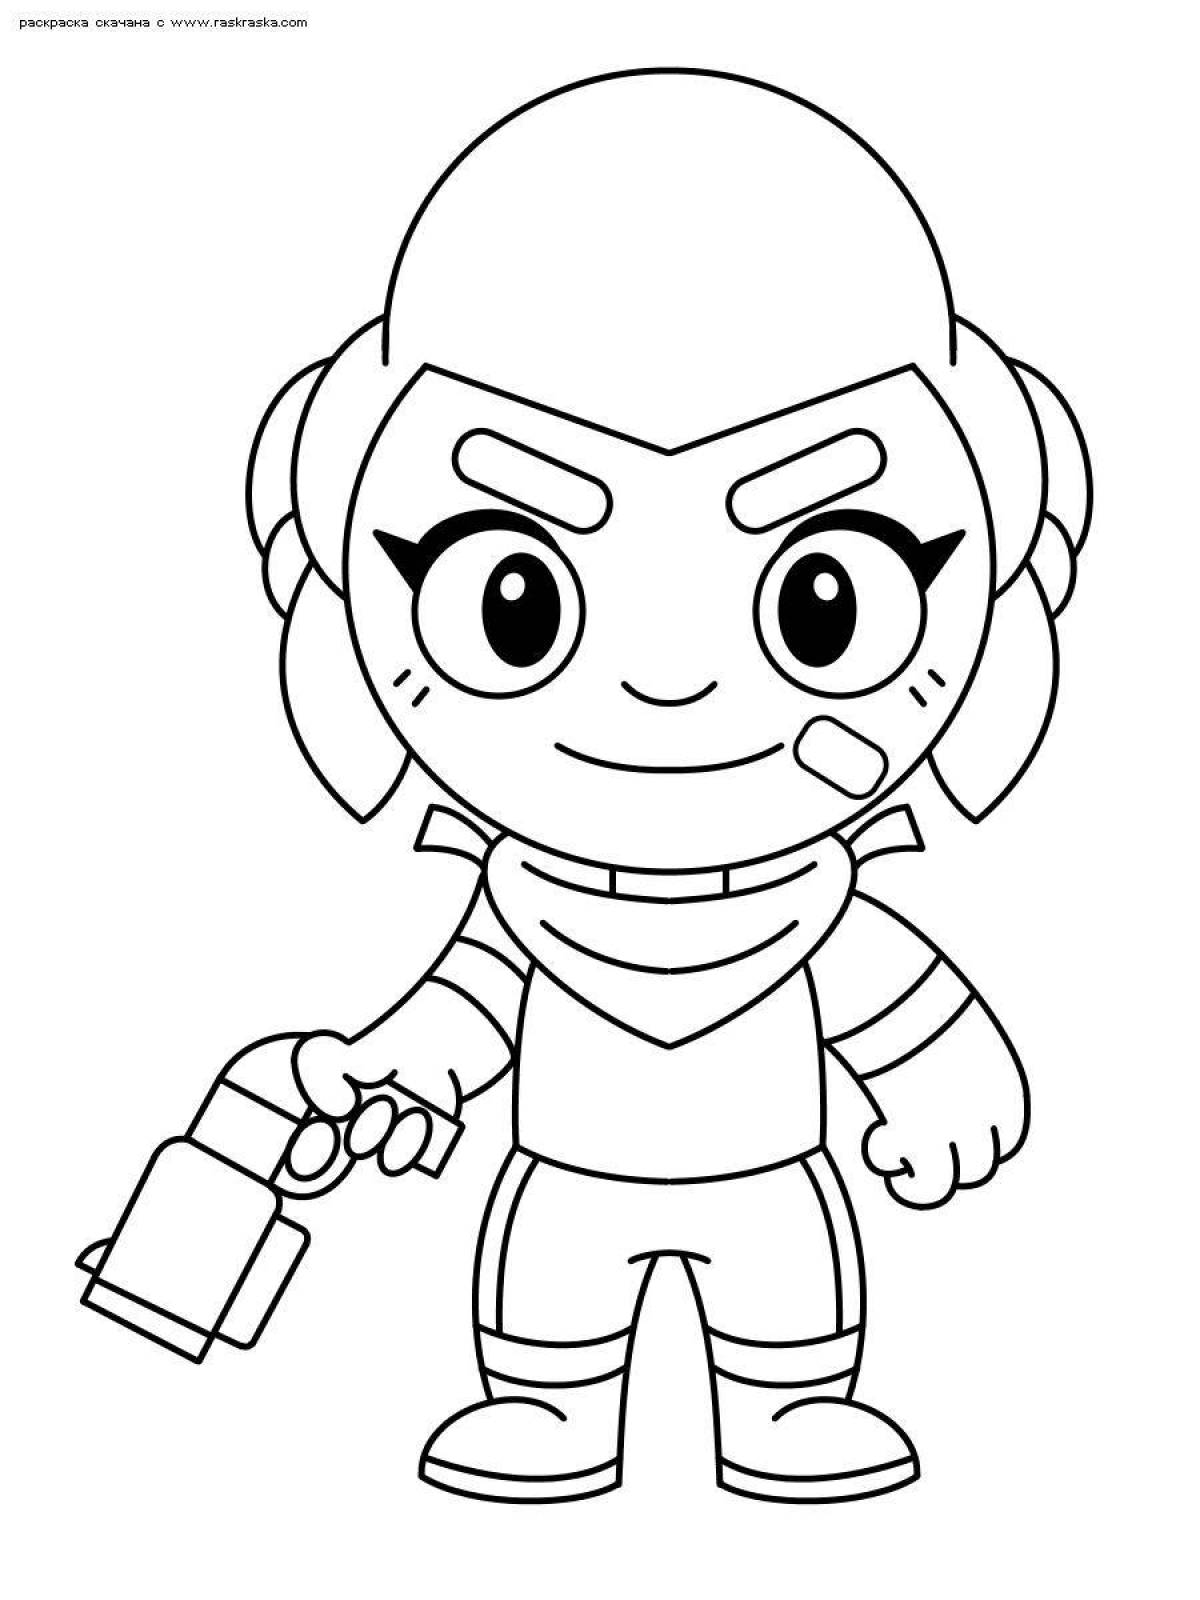 Colourful shelly bravo stars coloring page